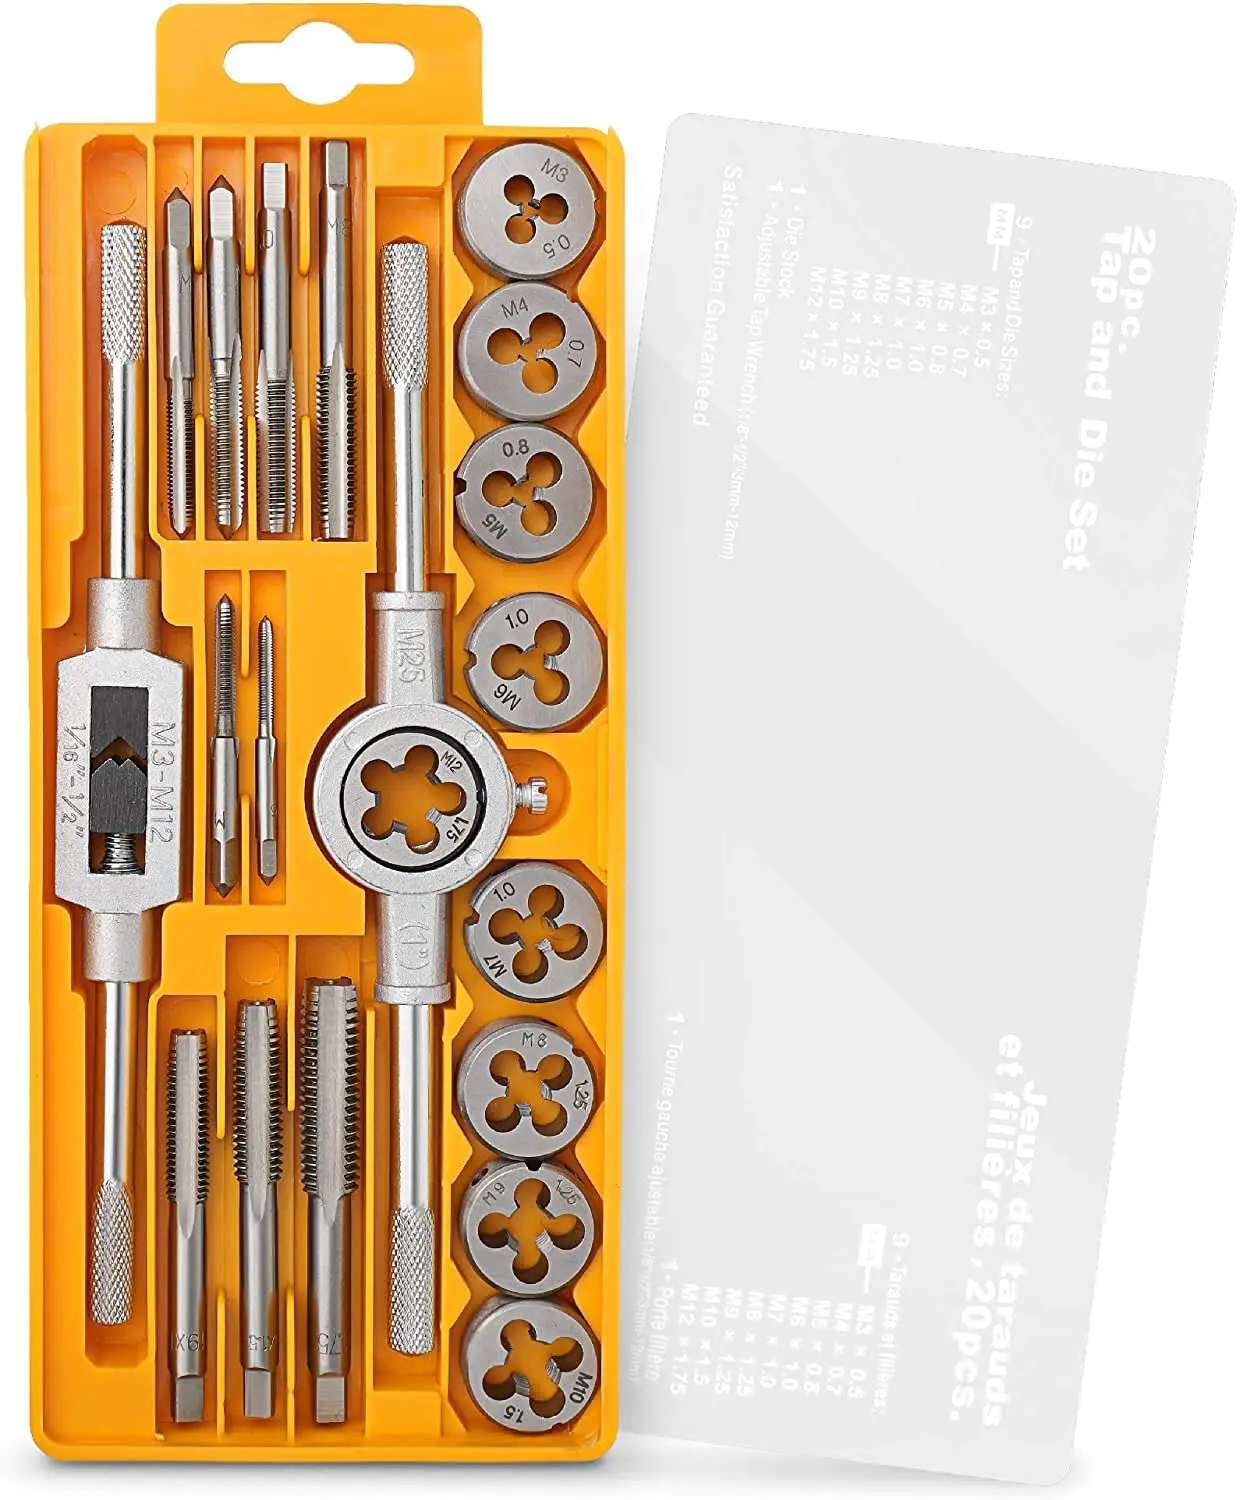 

20 Piece Metric Tap and Die Set. DIY Tapered & Plug Hand Tapping, Cutting, Threading, Forming, Chasing Kit for Home DIY Workshop